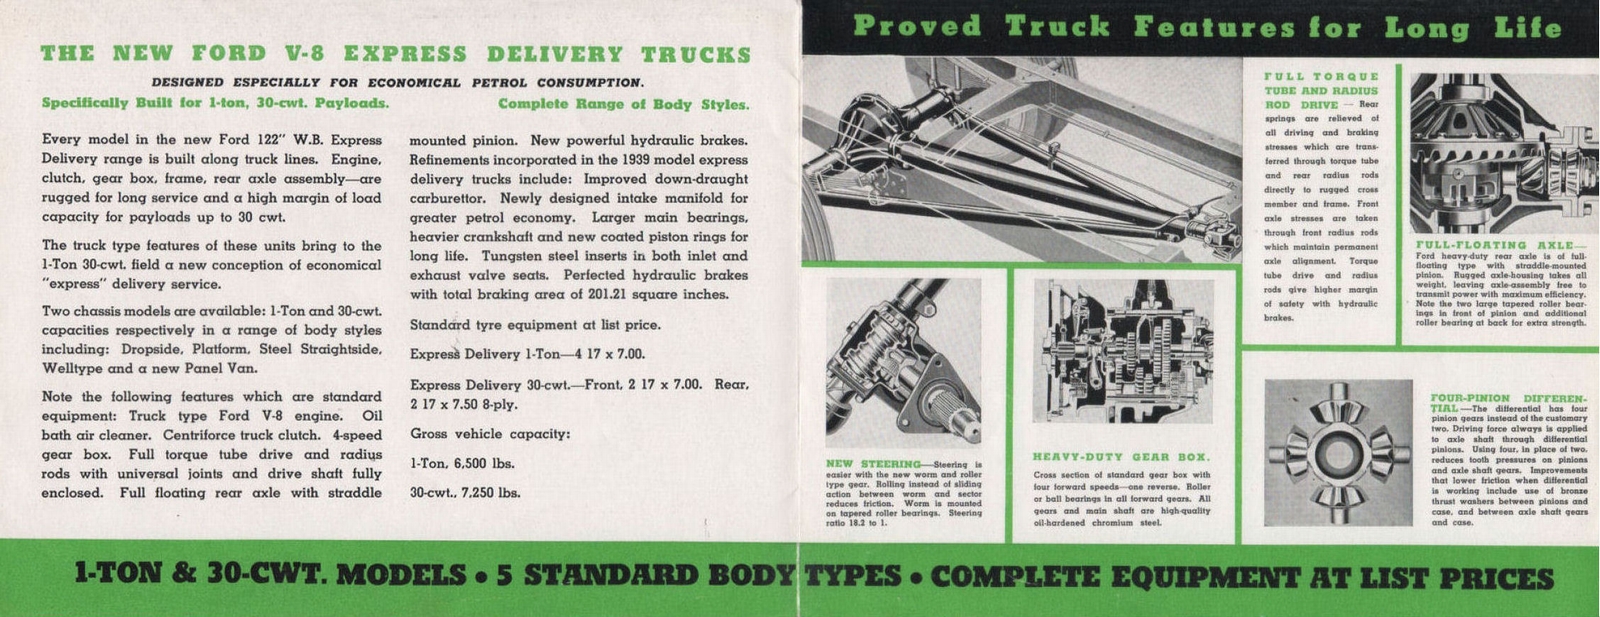 n_1939 Ford Express Delivery Foldout-01a.jpg